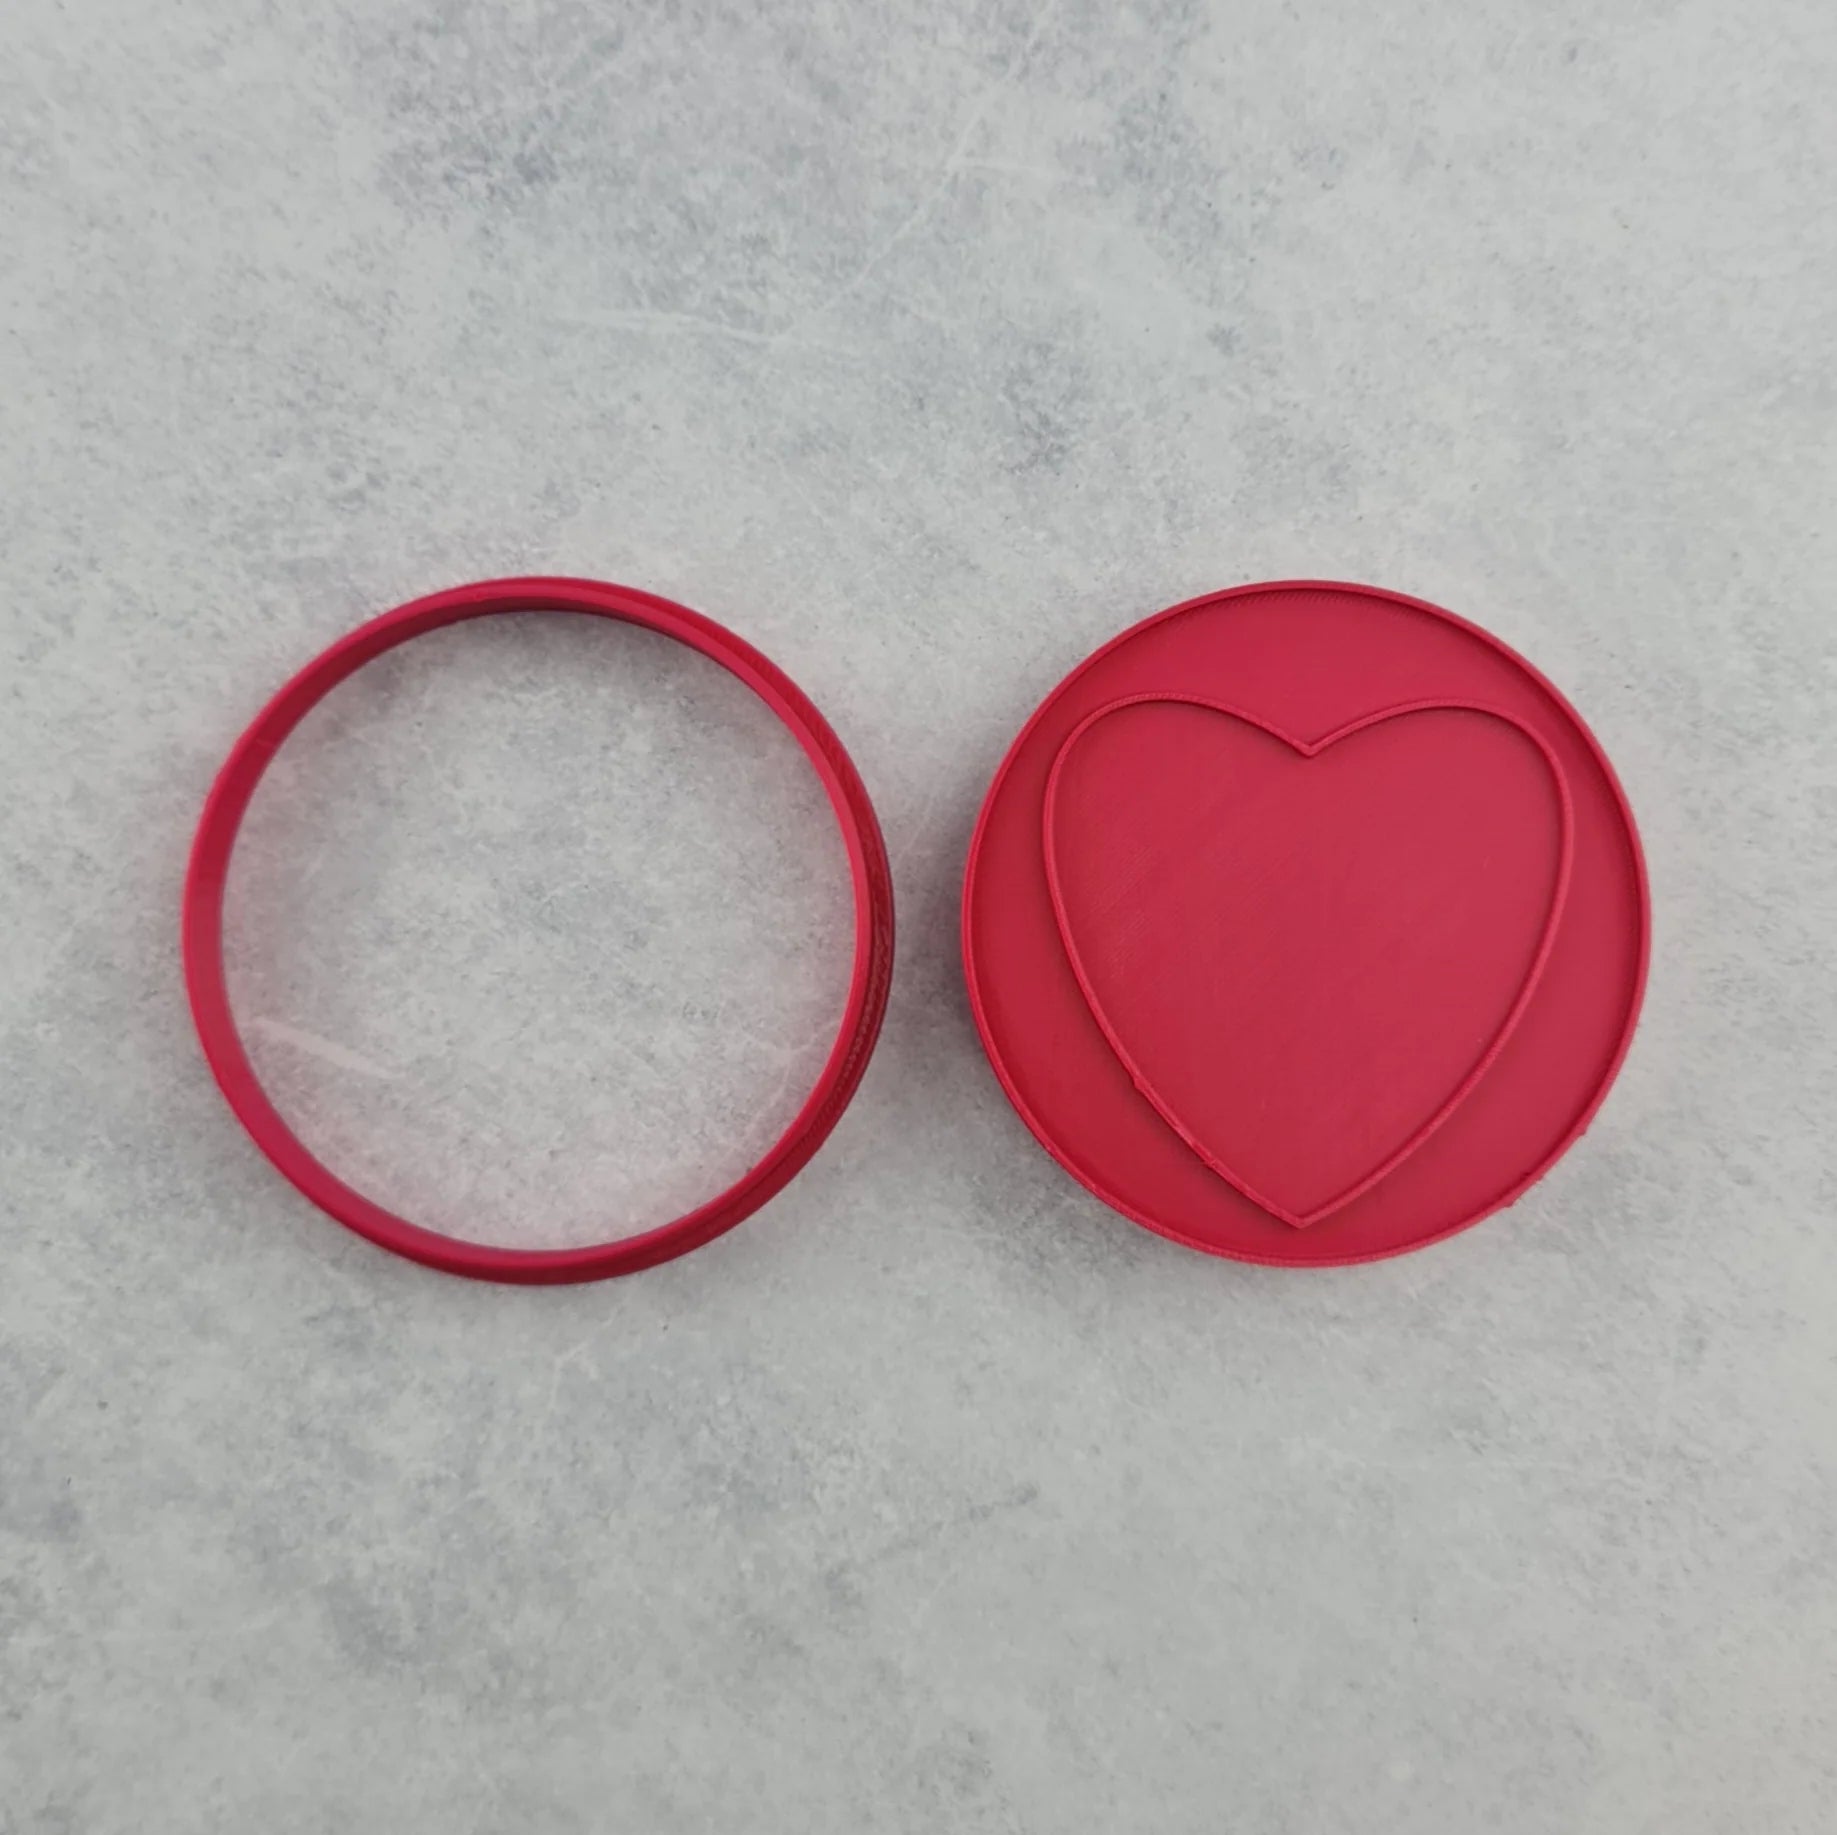 Candy Heart Cutter and Dough Imprint Set by The Confectionist